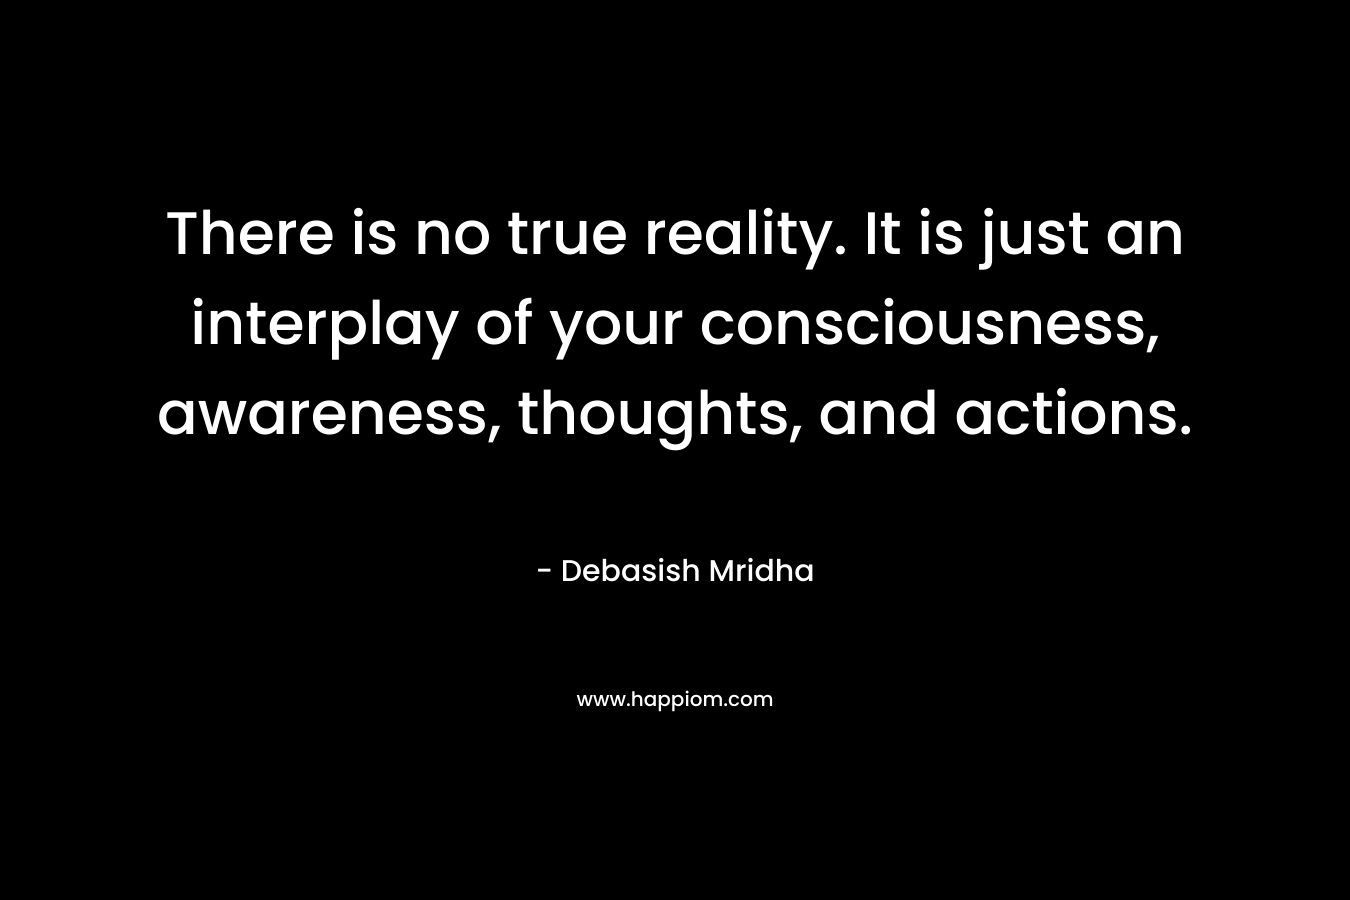 There is no true reality. It is just an interplay of your consciousness, awareness, thoughts, and actions. – Debasish Mridha